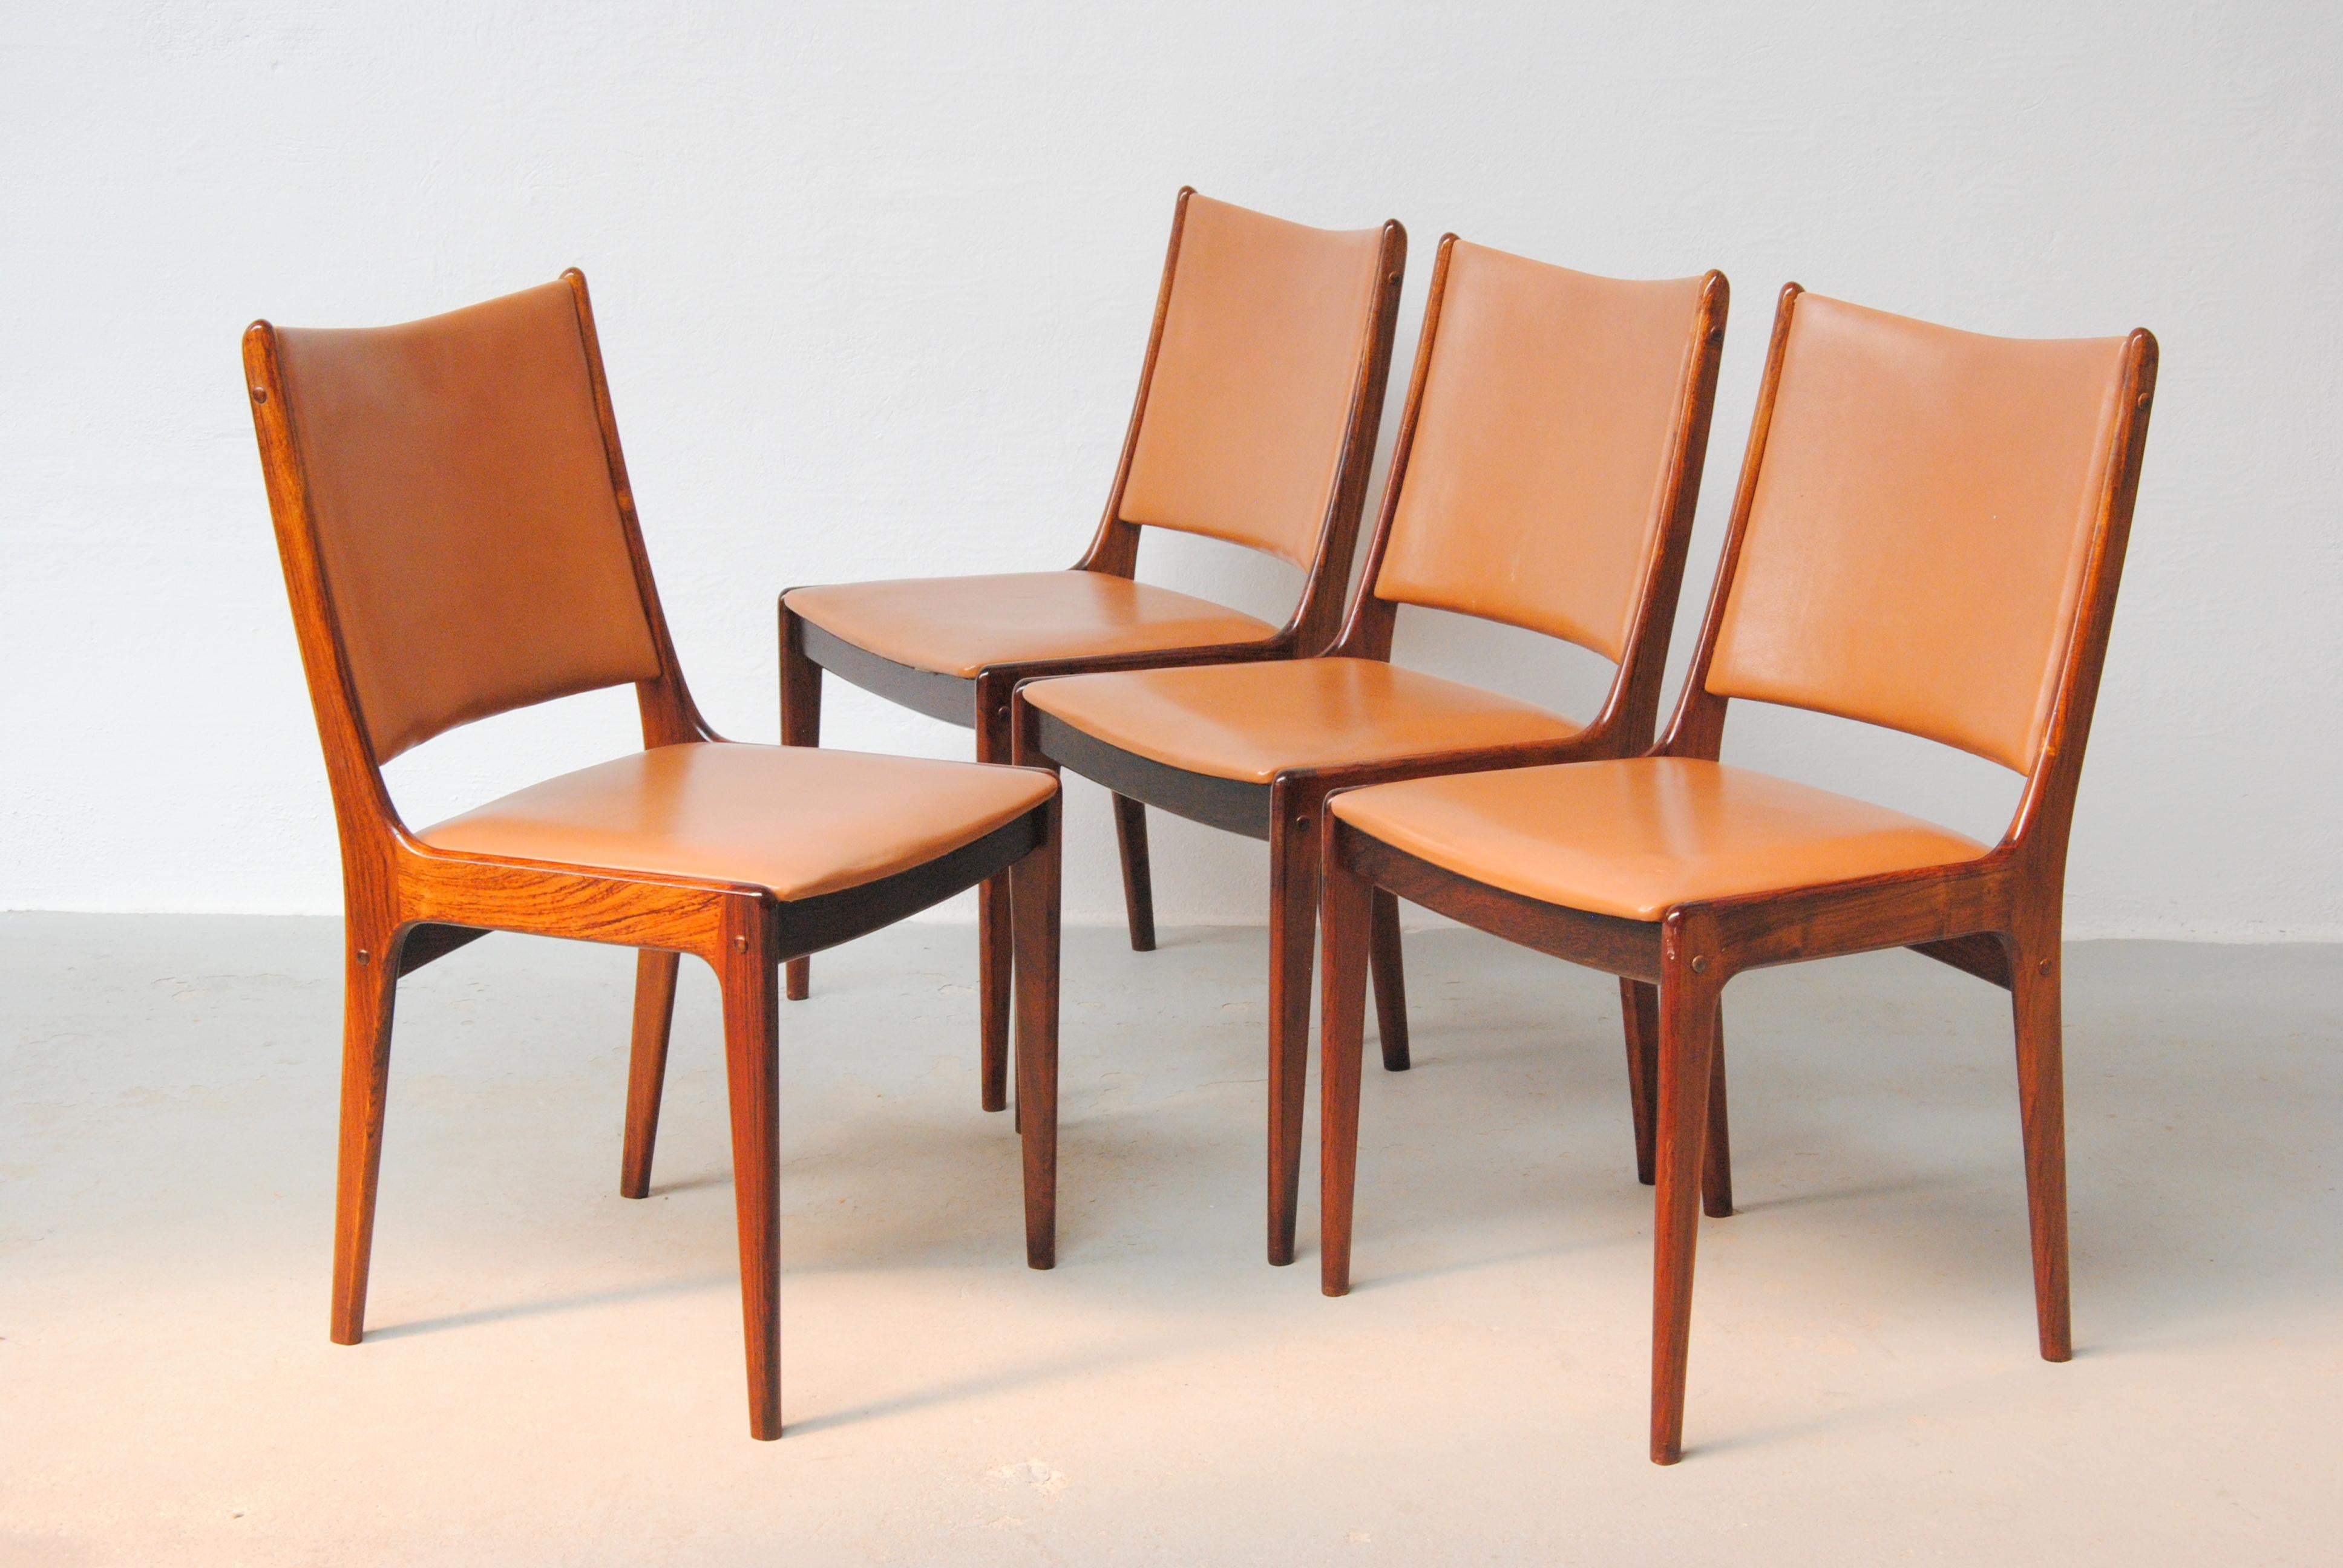 Set of twelve fully restored 1960s Johannes Andersen dining chairs in rosewood made by Uldum Møbler, Denmark.

The set of dining chairs feature a clean simple yet elegant design that will fit in well in many enviroments.

The chairs have been fully